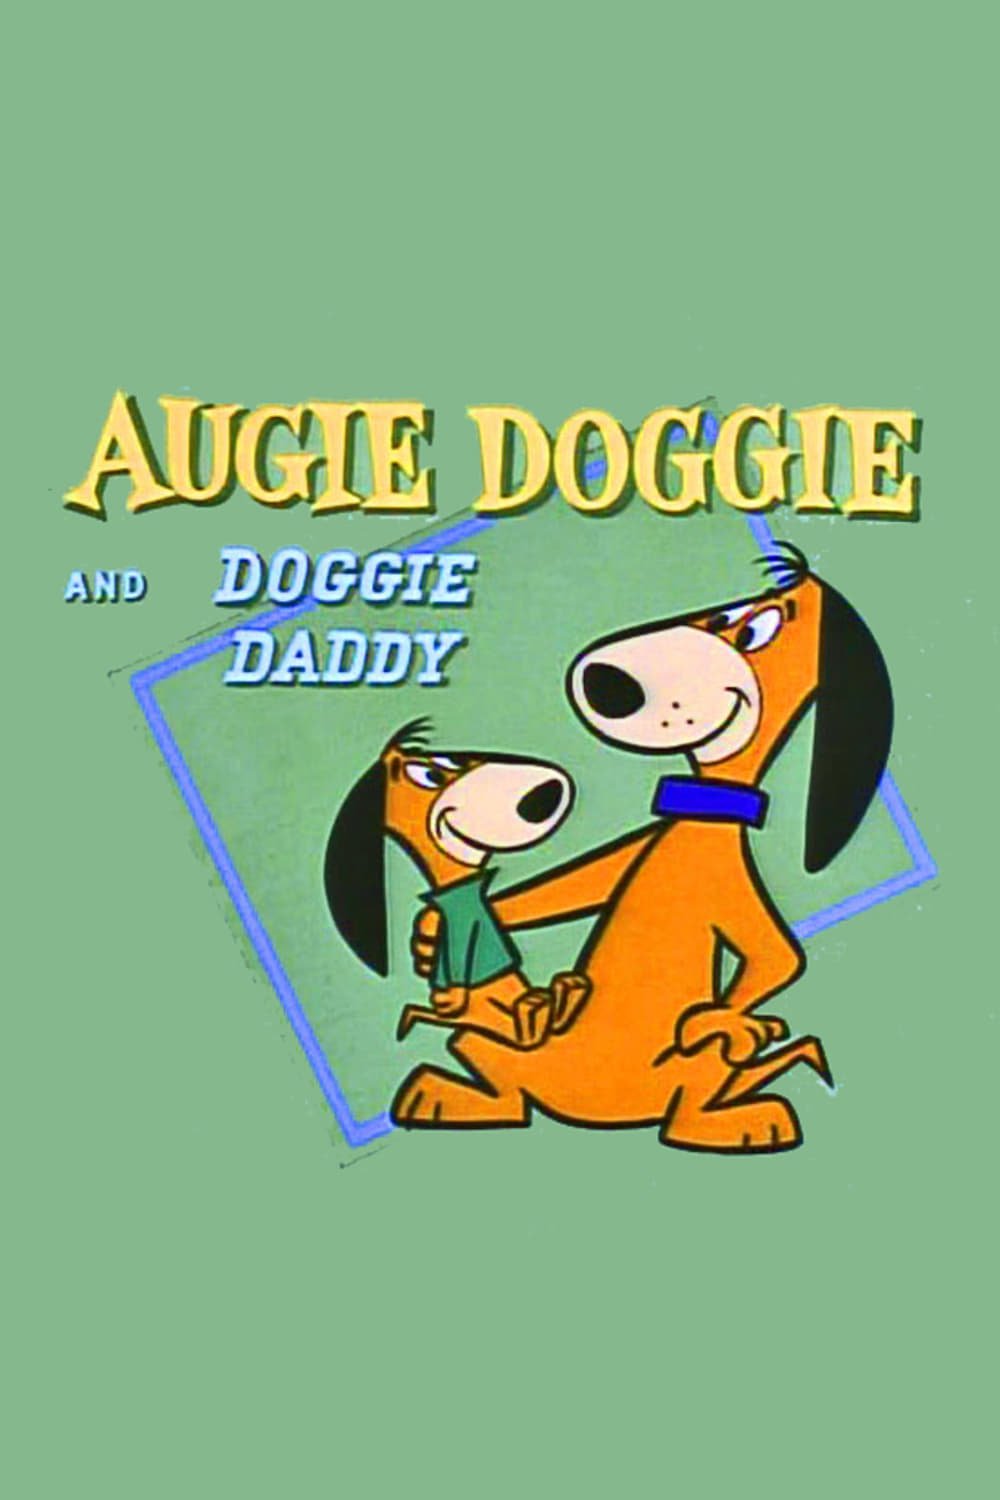 Augie Doggie and Doggie Daddy (1959)